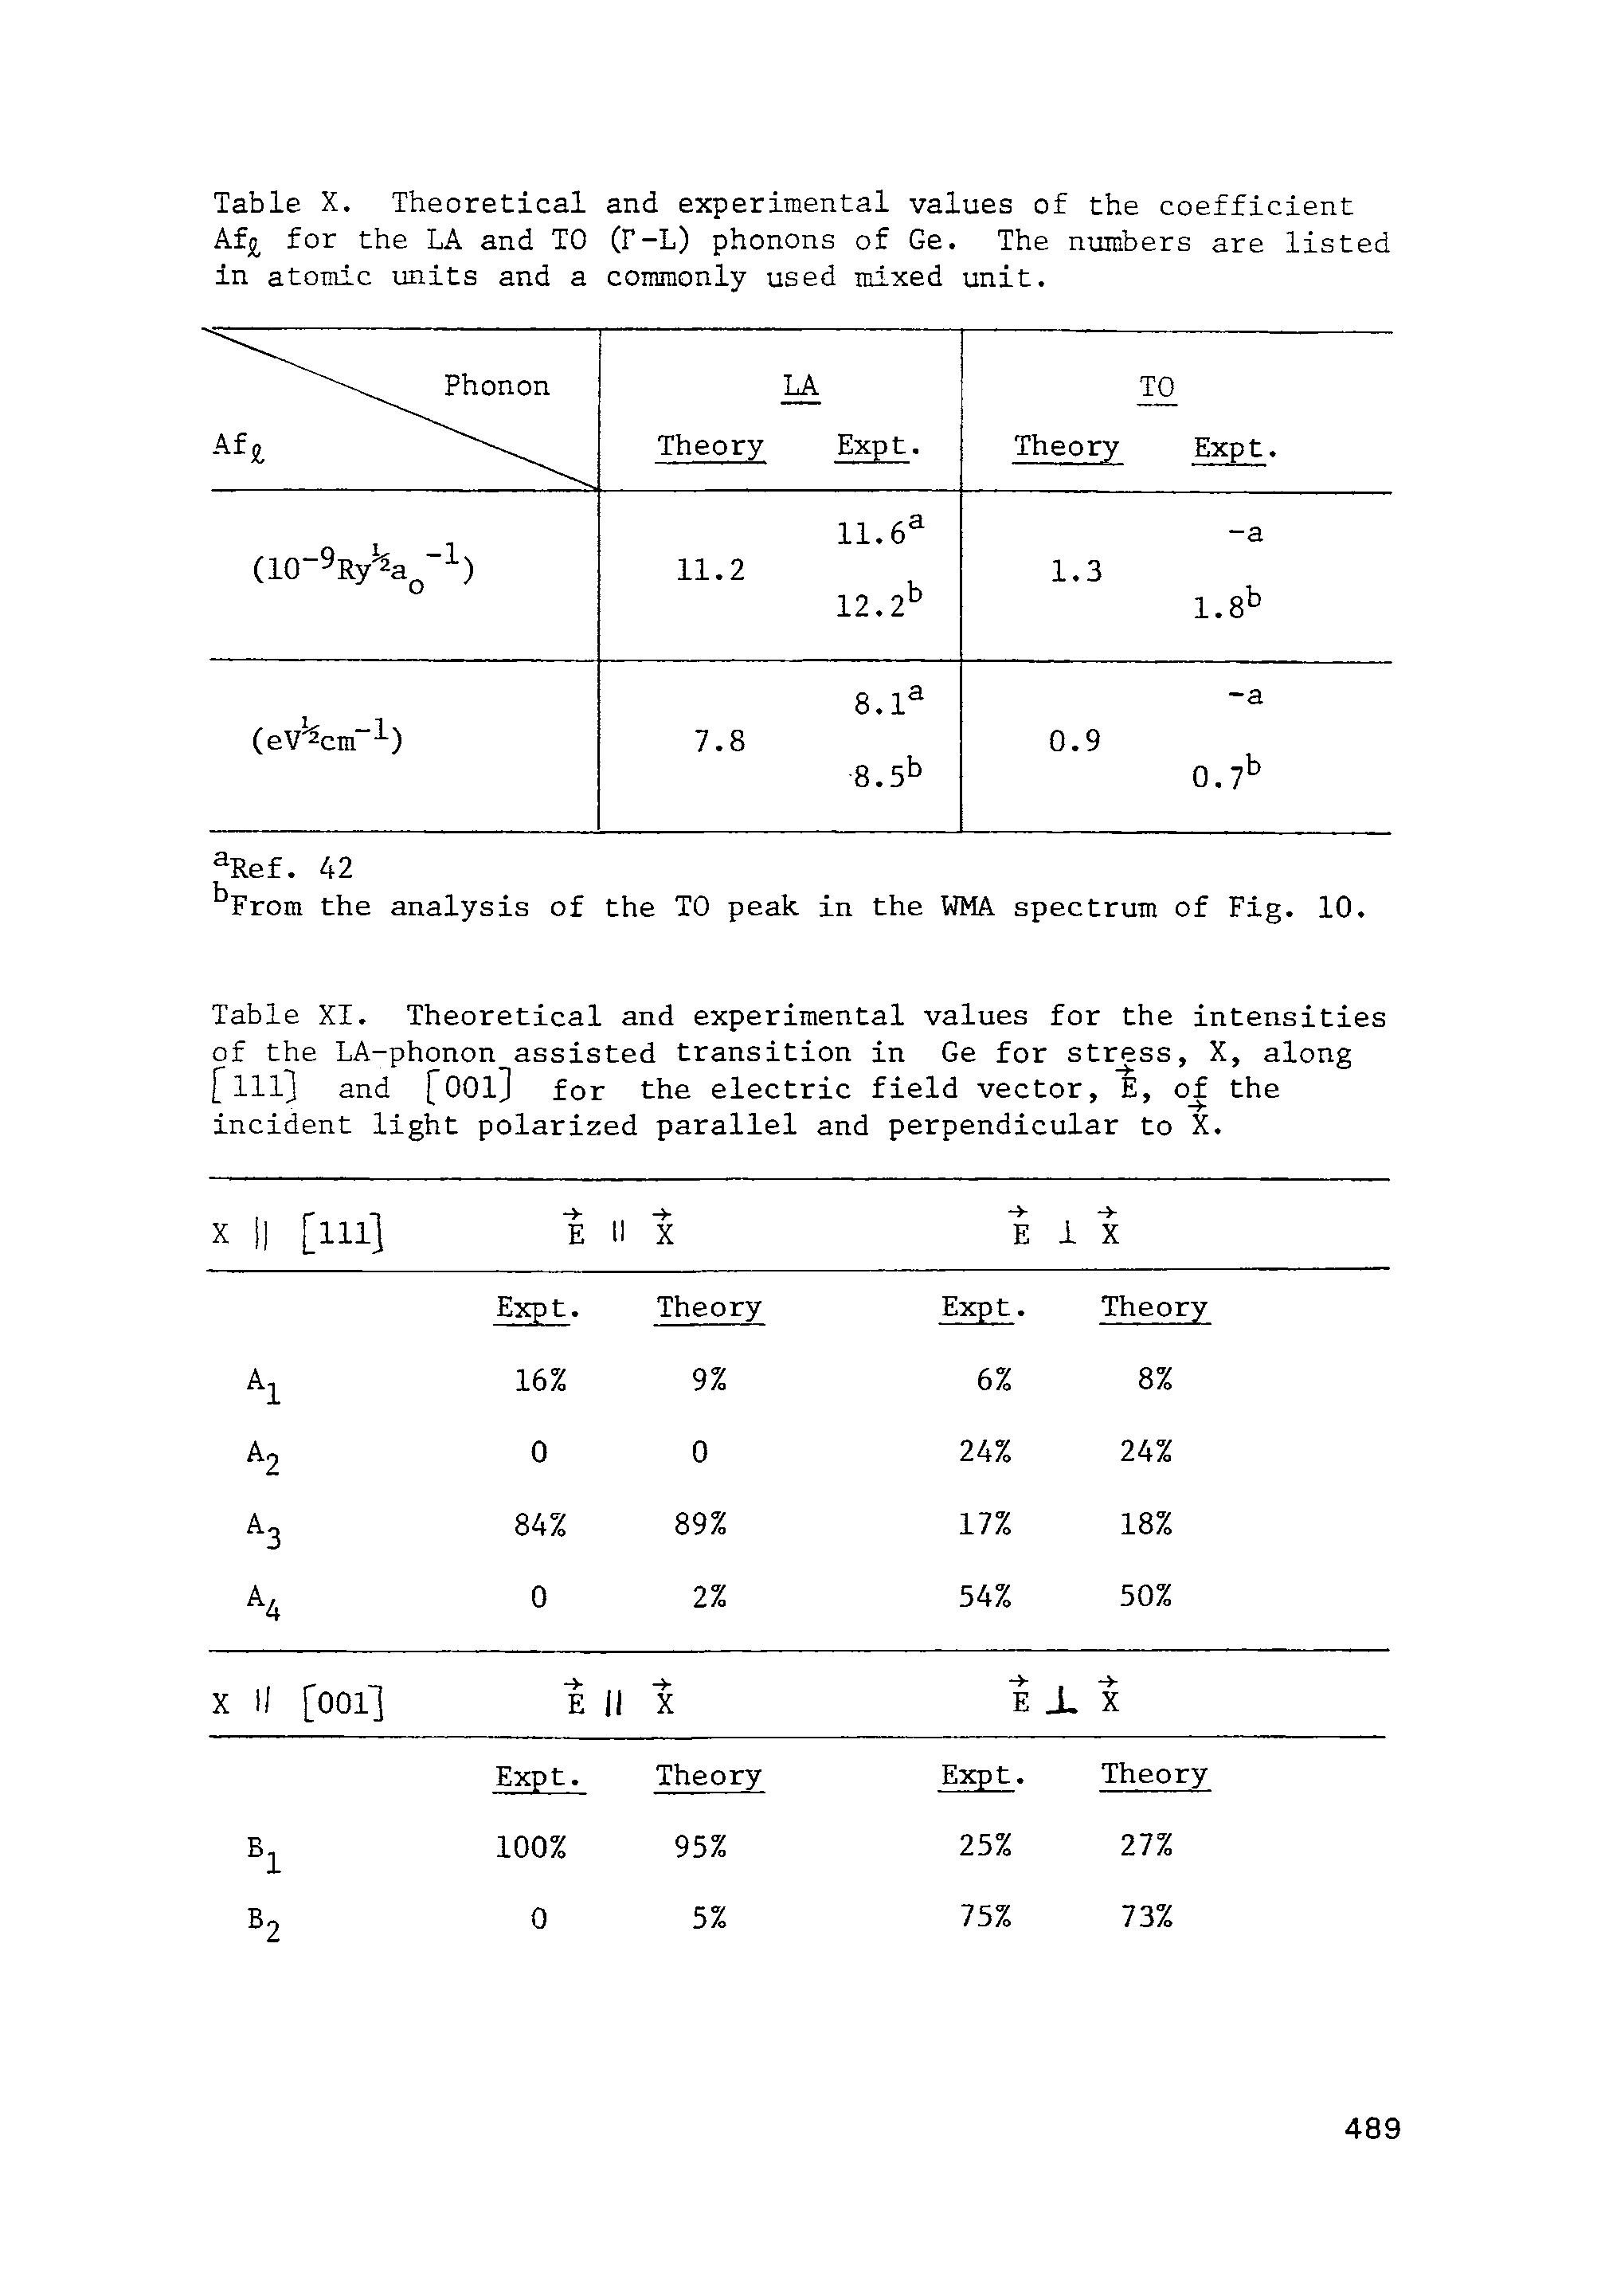 Table XI. Theoretical and experimental values for the intensities of the LA-phonon assisted transition in Ge for stress, X, along fill and fool for the electric field vector, E, of the incident light polarized parallel and perpendicular to X.